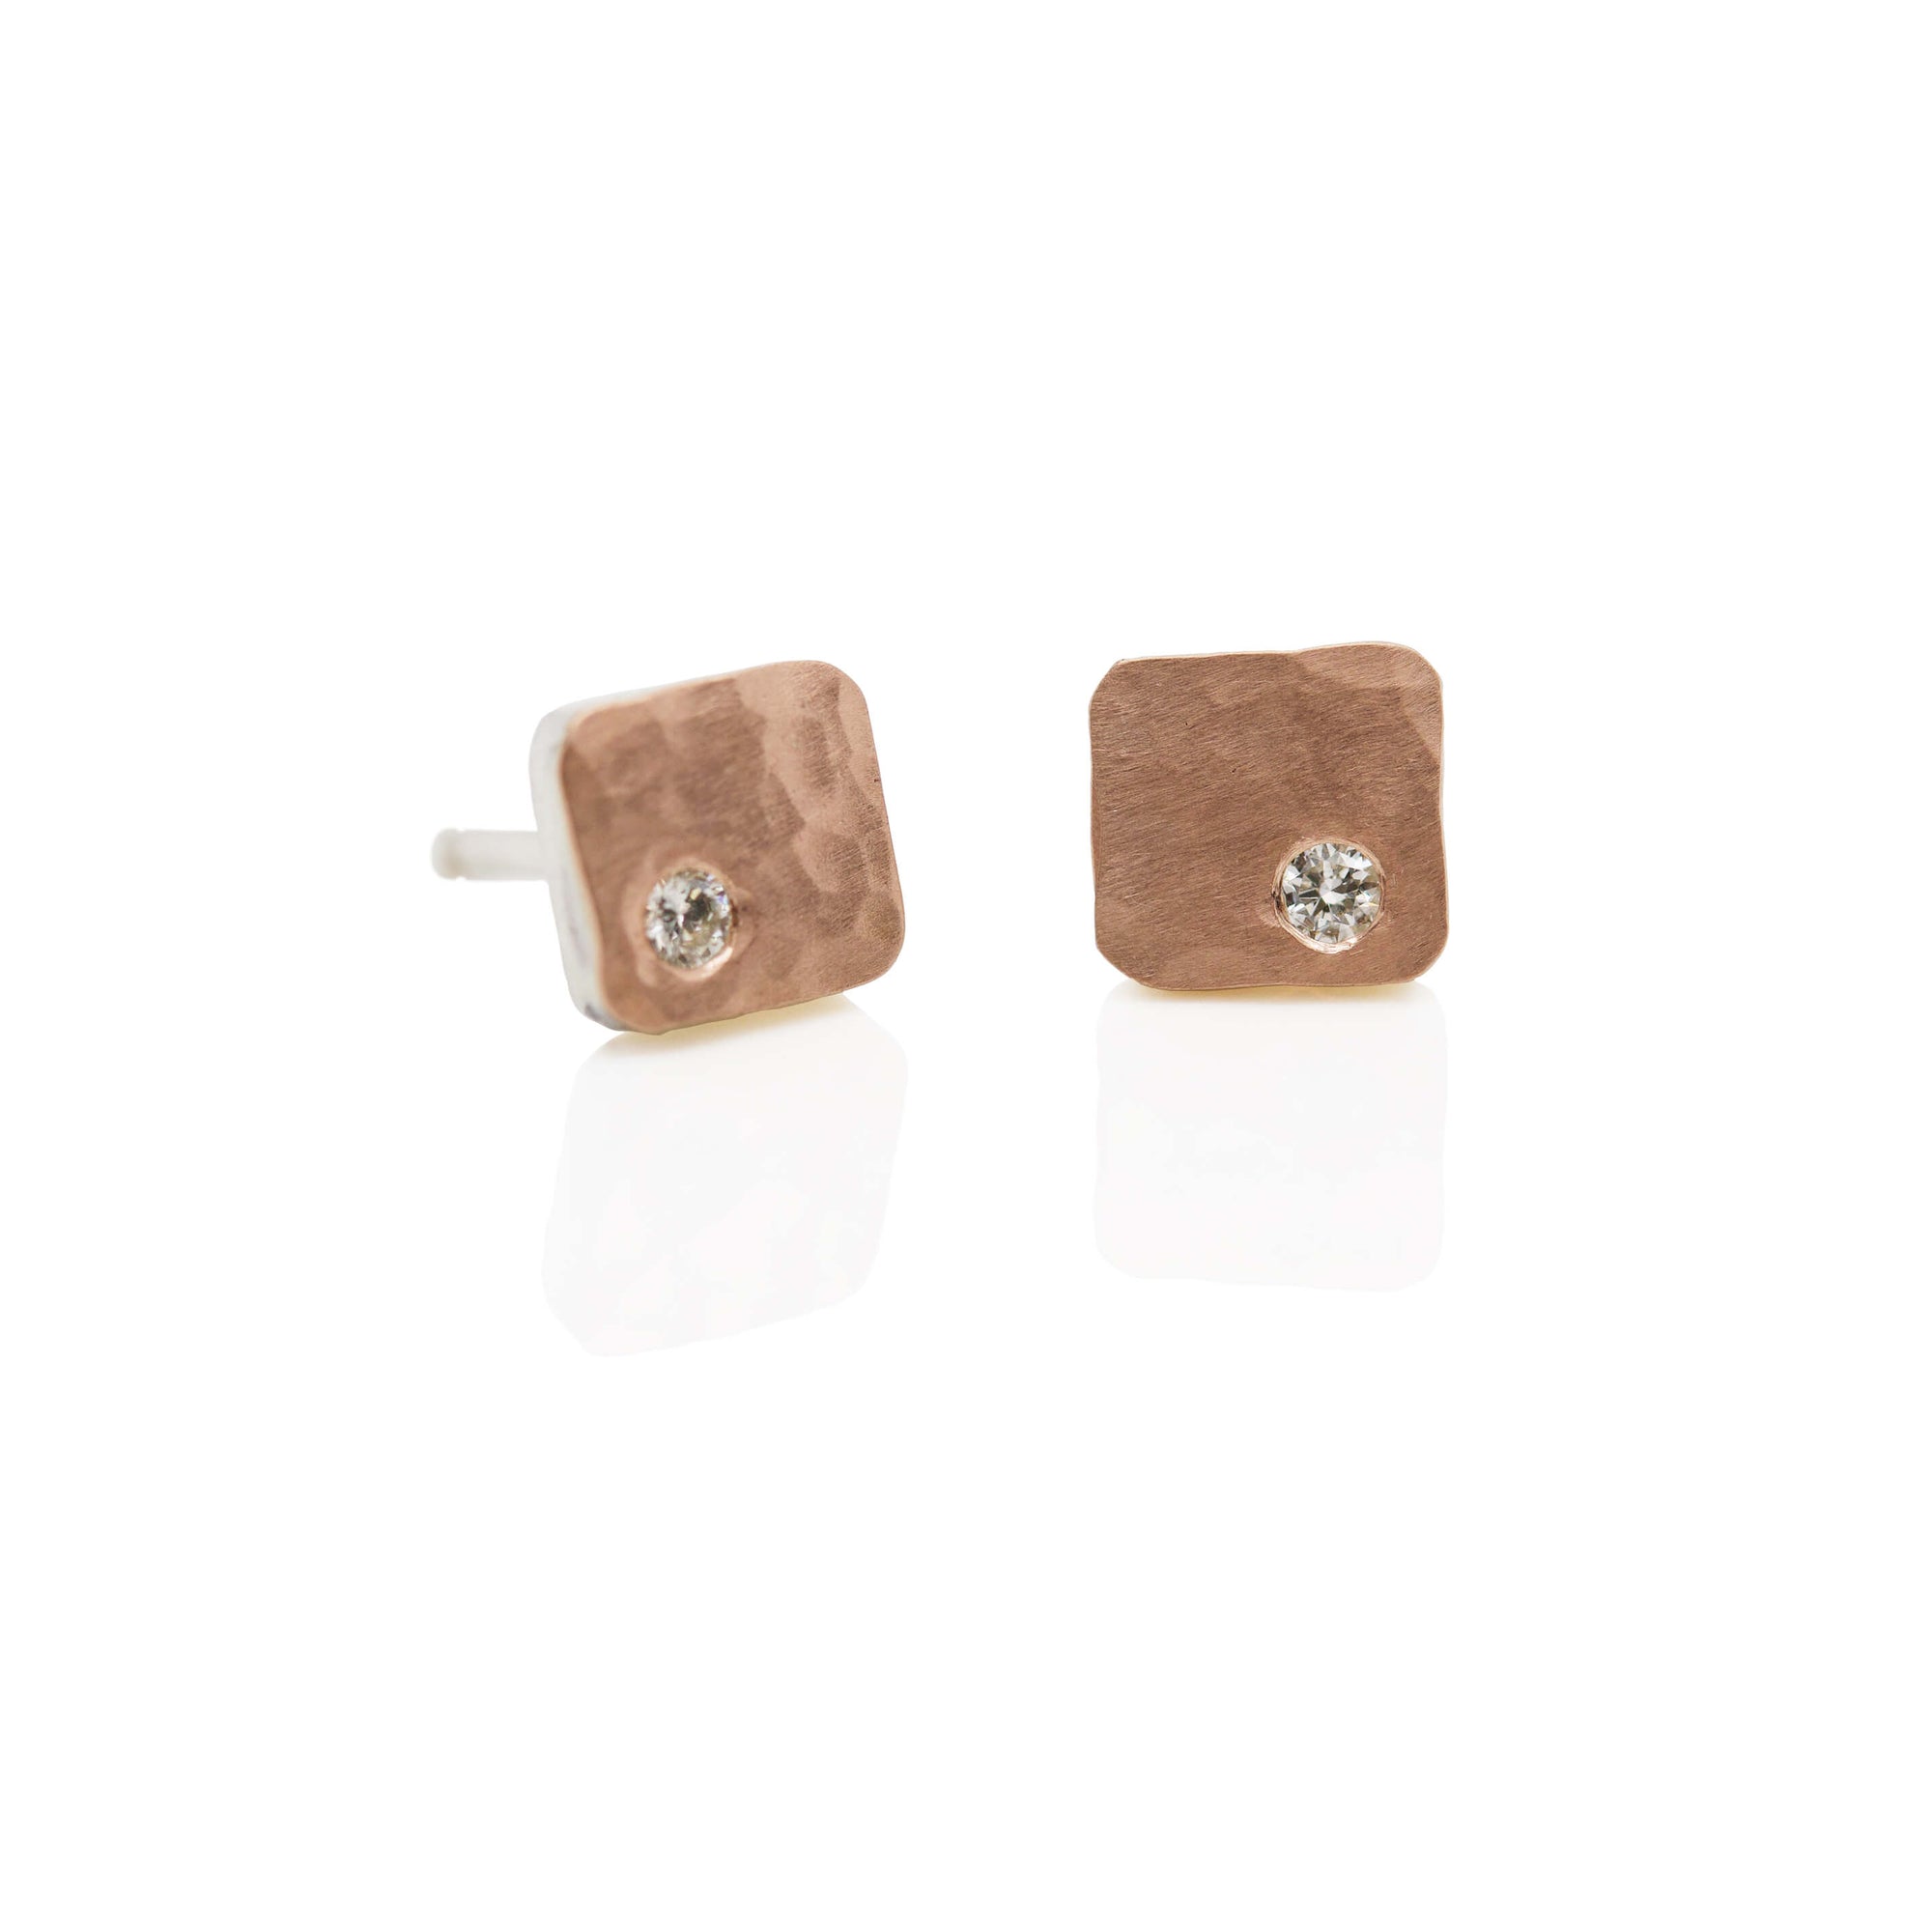 6mm Cell Studs in Hammered Gold with Diamond Accents